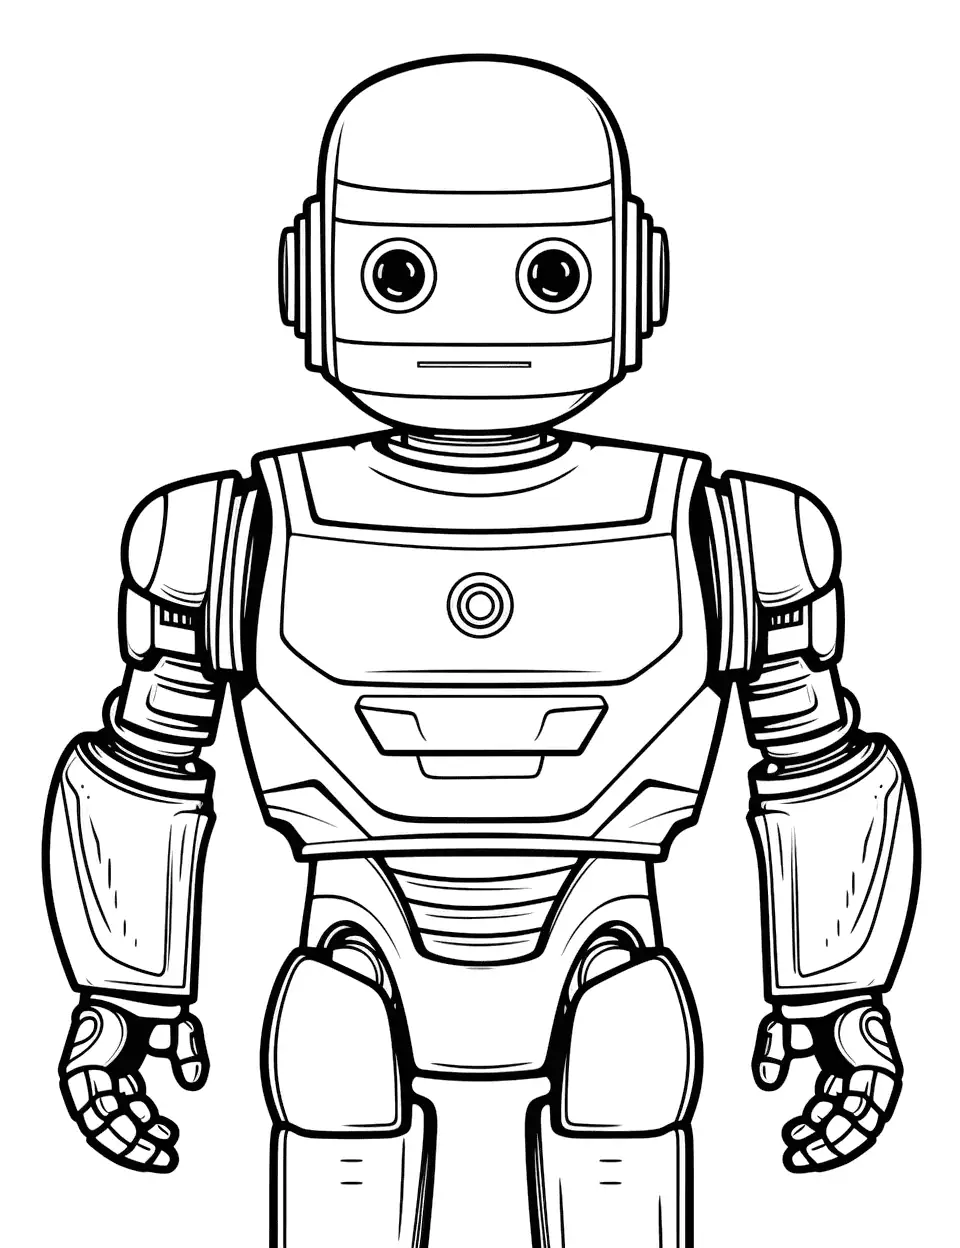 Robocop-Like Robot Officer Coloring Page - A robot resembling Robocop on patrol.